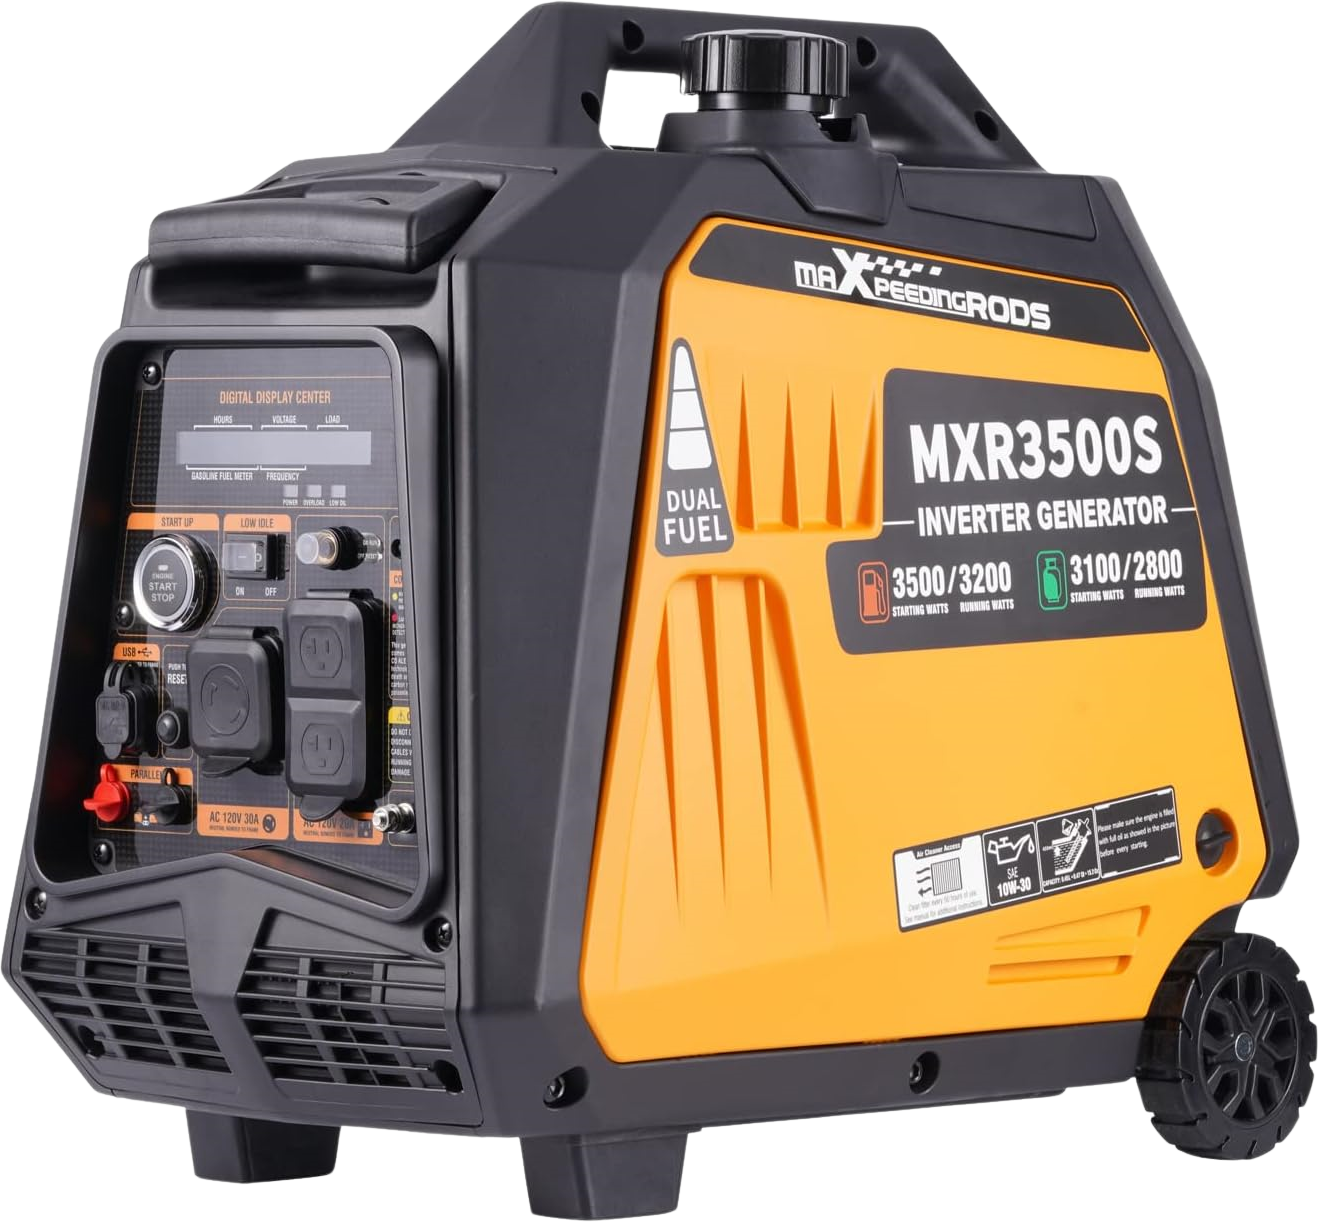 Maxpeedingrods MXR3500-DC-US Dual Fuel Inverter Generator 3200W/3500W RV and Parallel Ready with CO Alert and Electric Start New